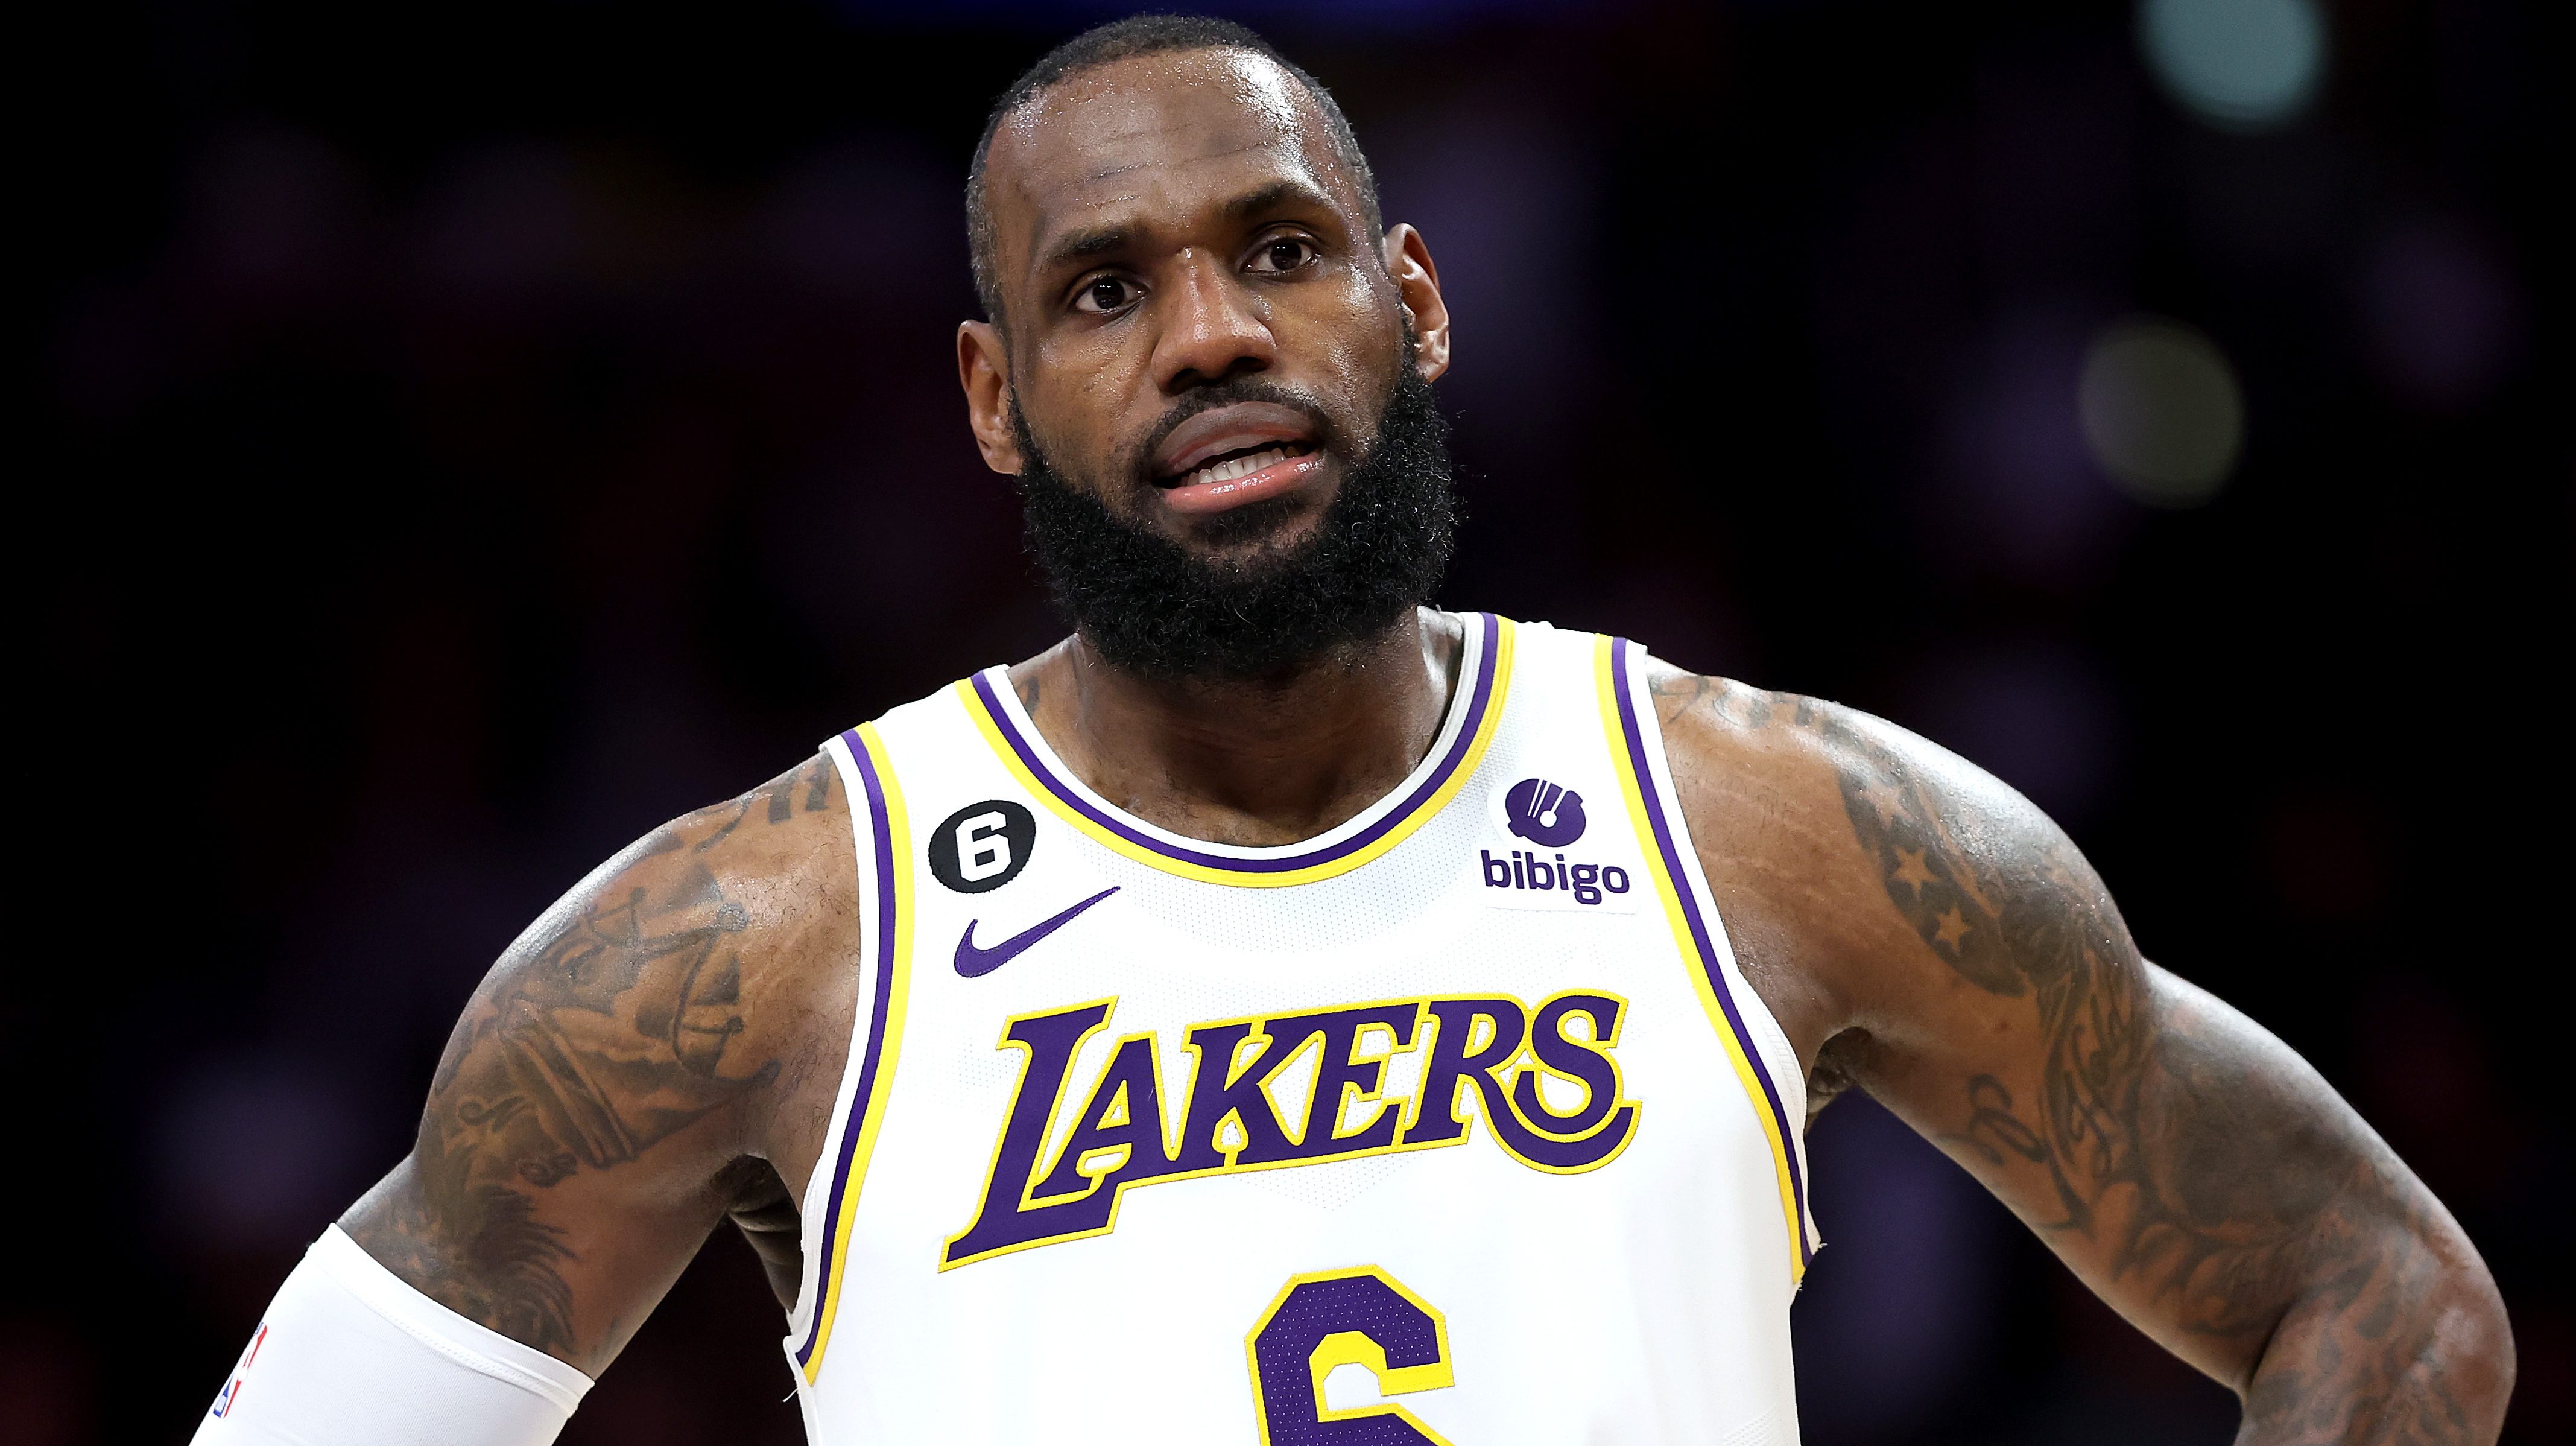 Lakers Star LeBron James Storms Off Court After Loss to Sixers